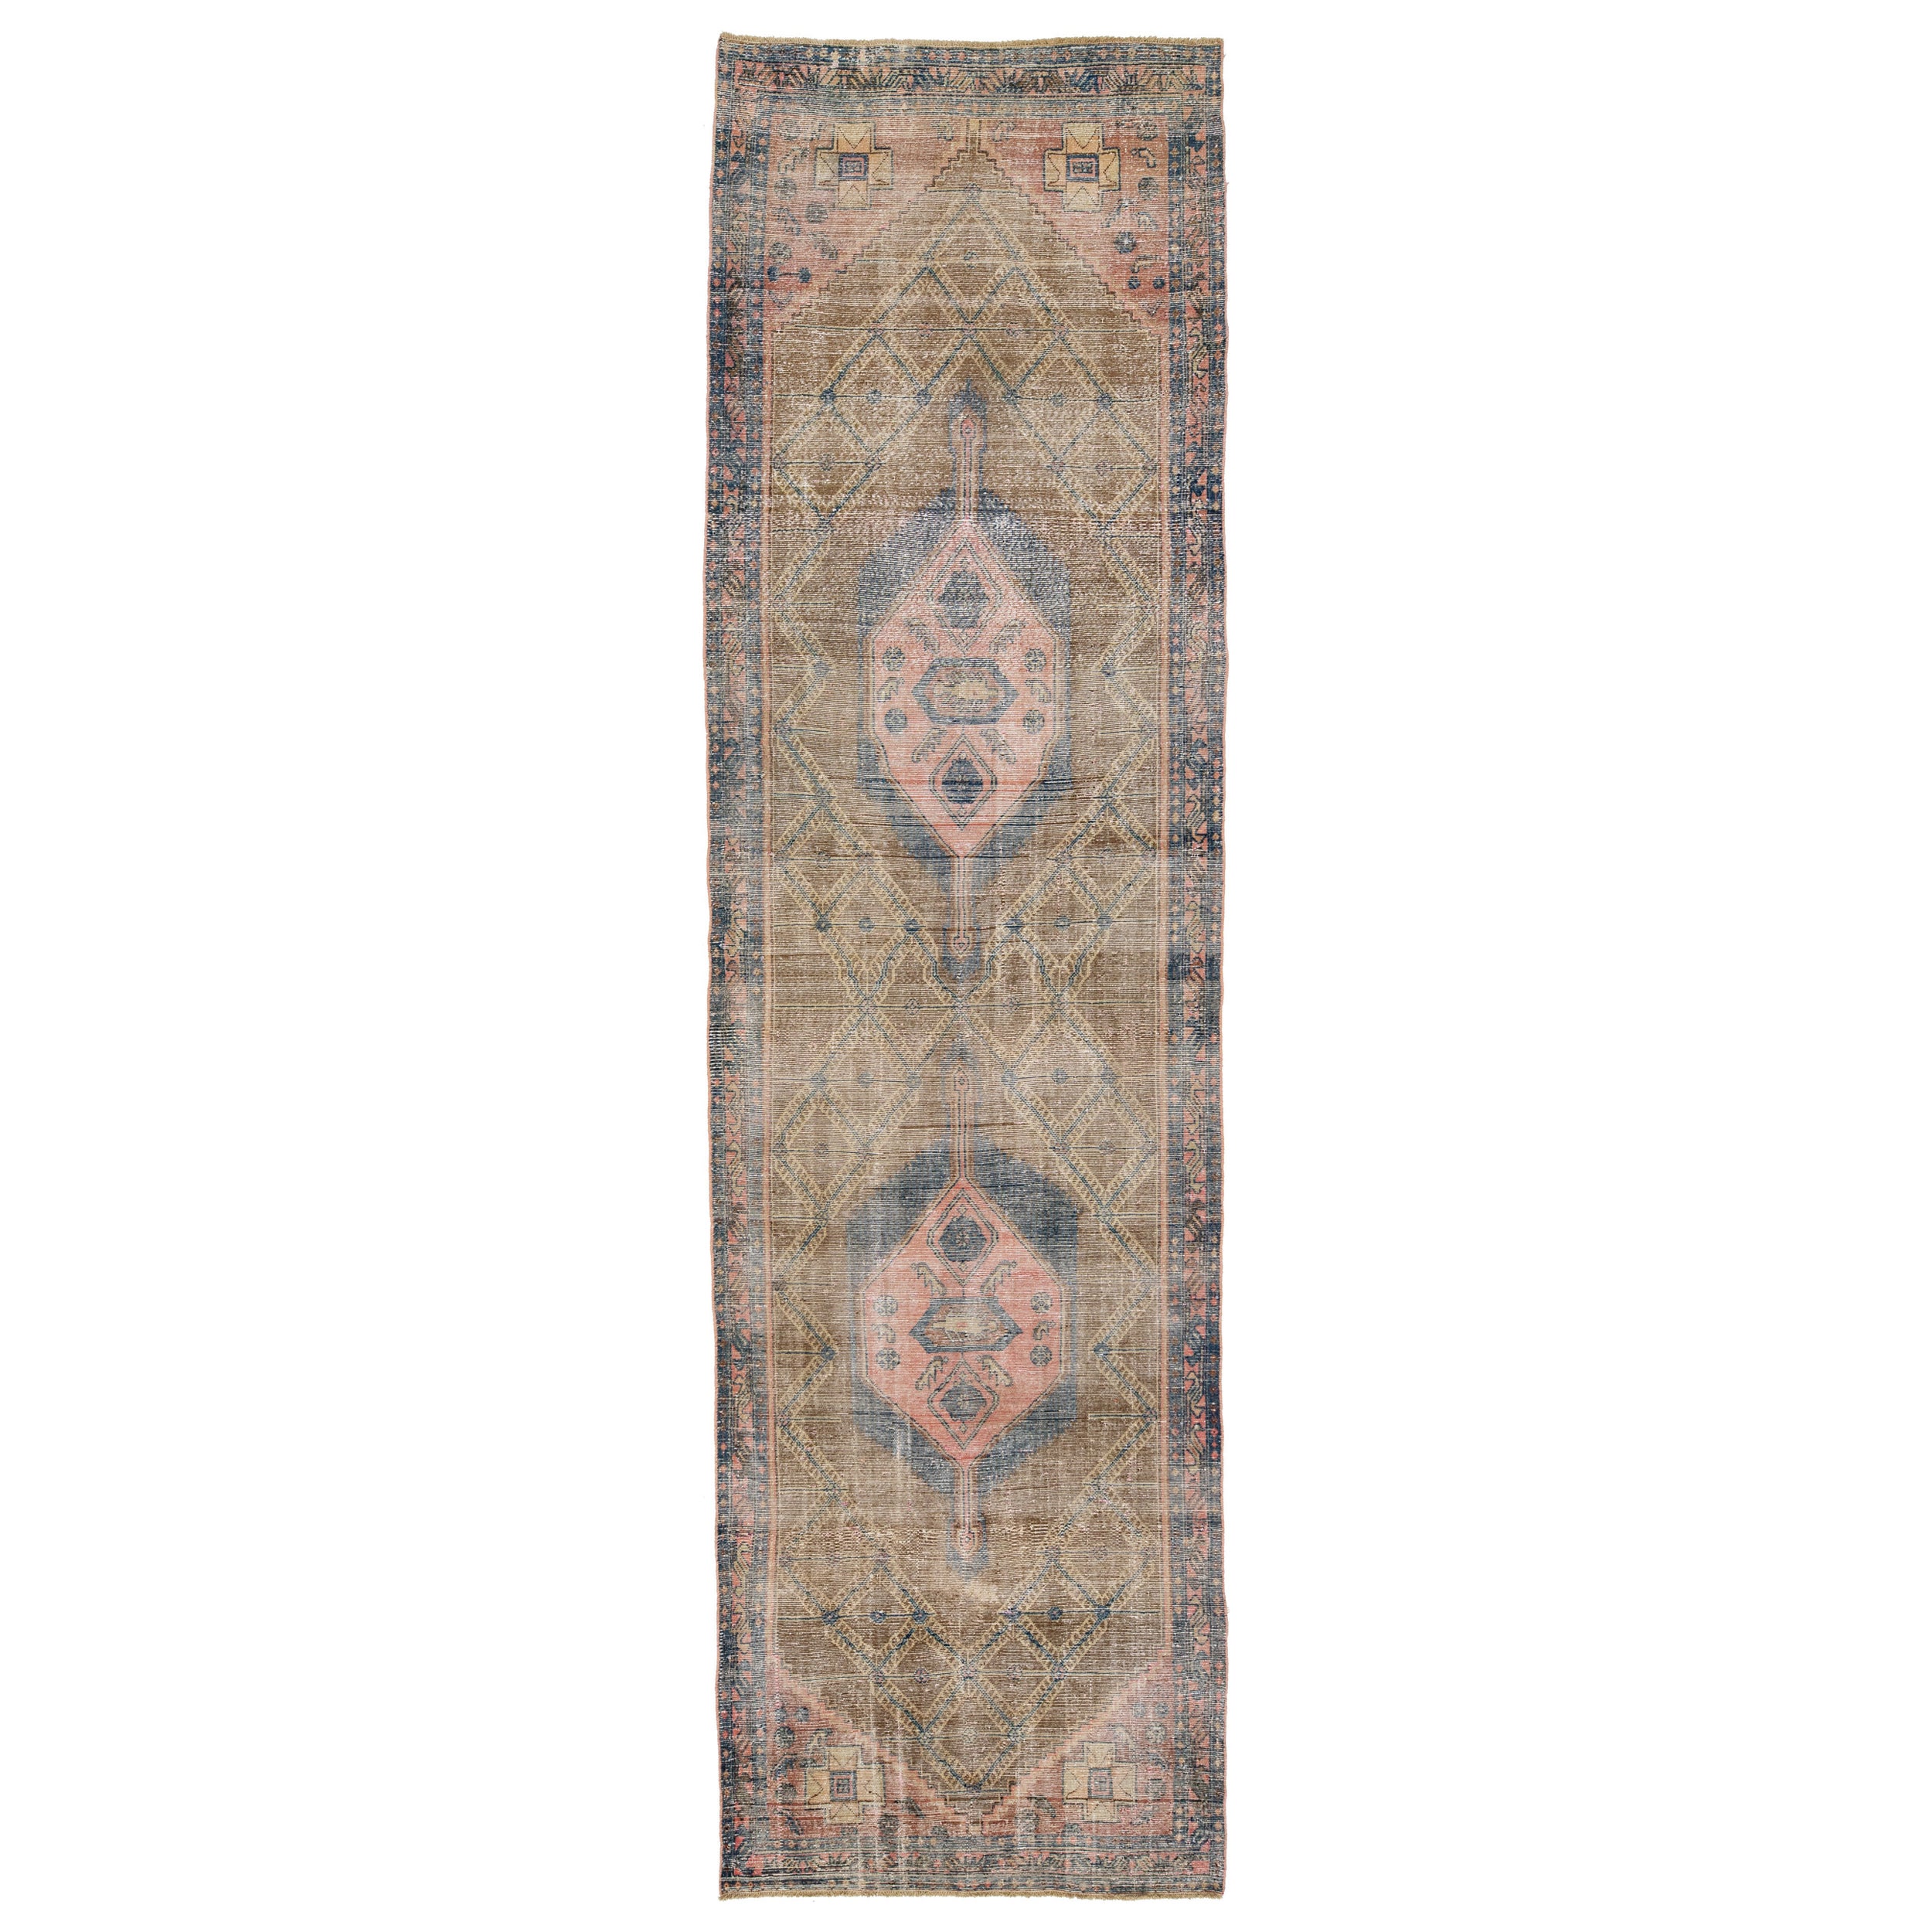 4 x 15 Vintage Distressed Persian Wool Runner In Brown With Tribal Motif For Sale